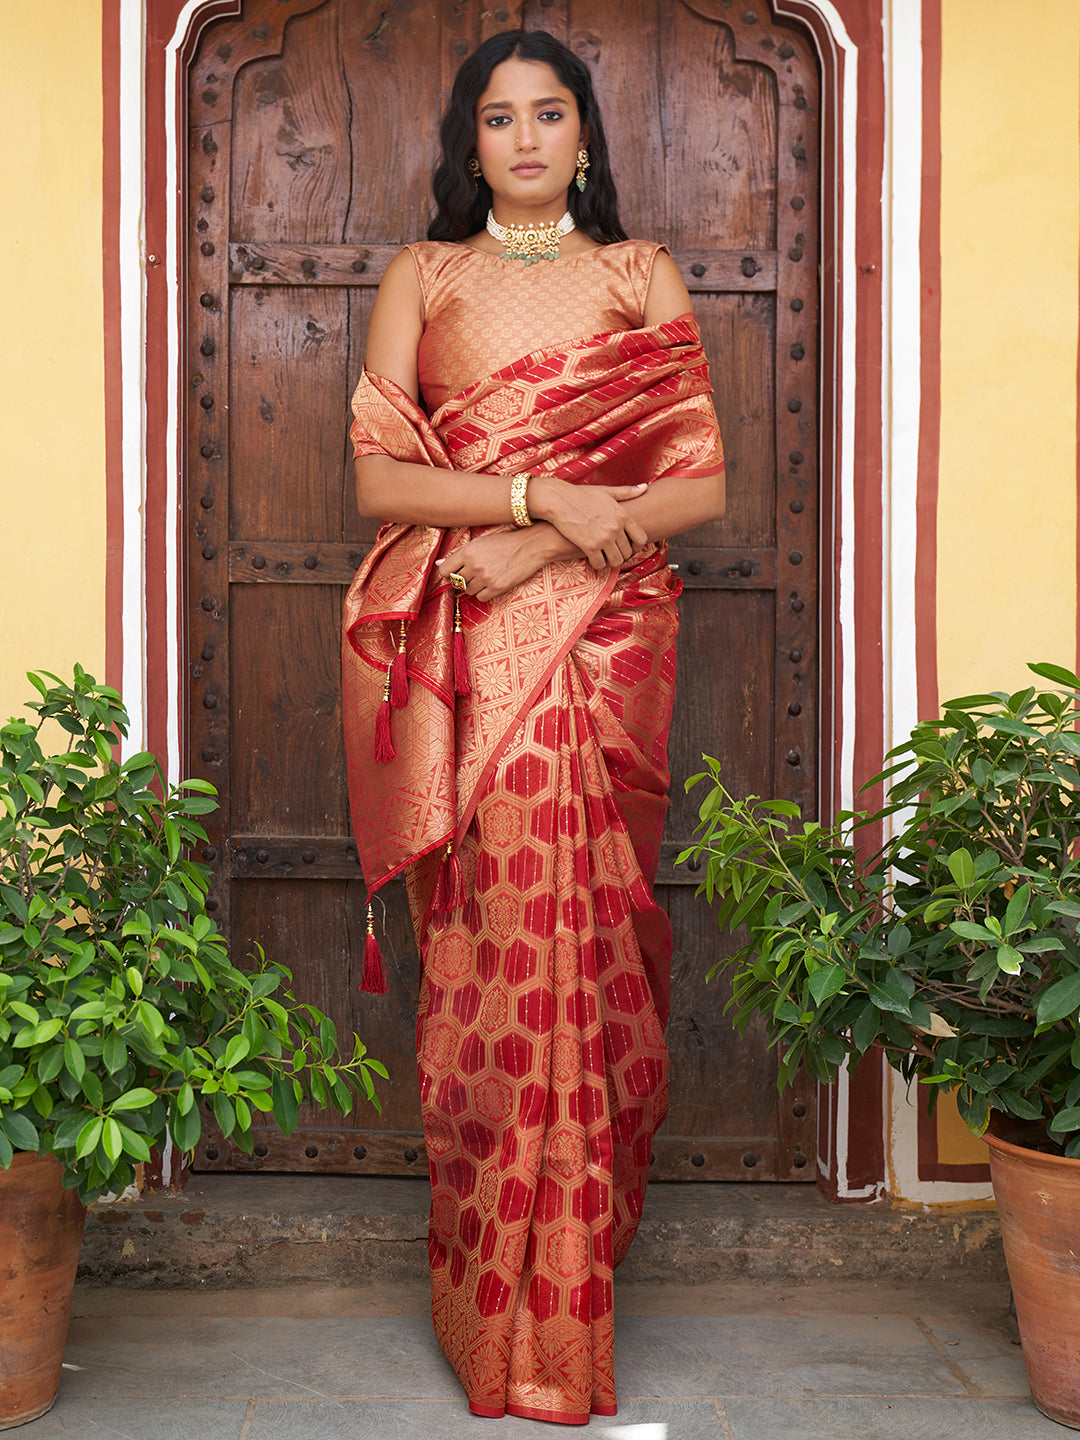 Red Organza Woven Ethnic Motifs Saree with Unstitched Blouse Piece